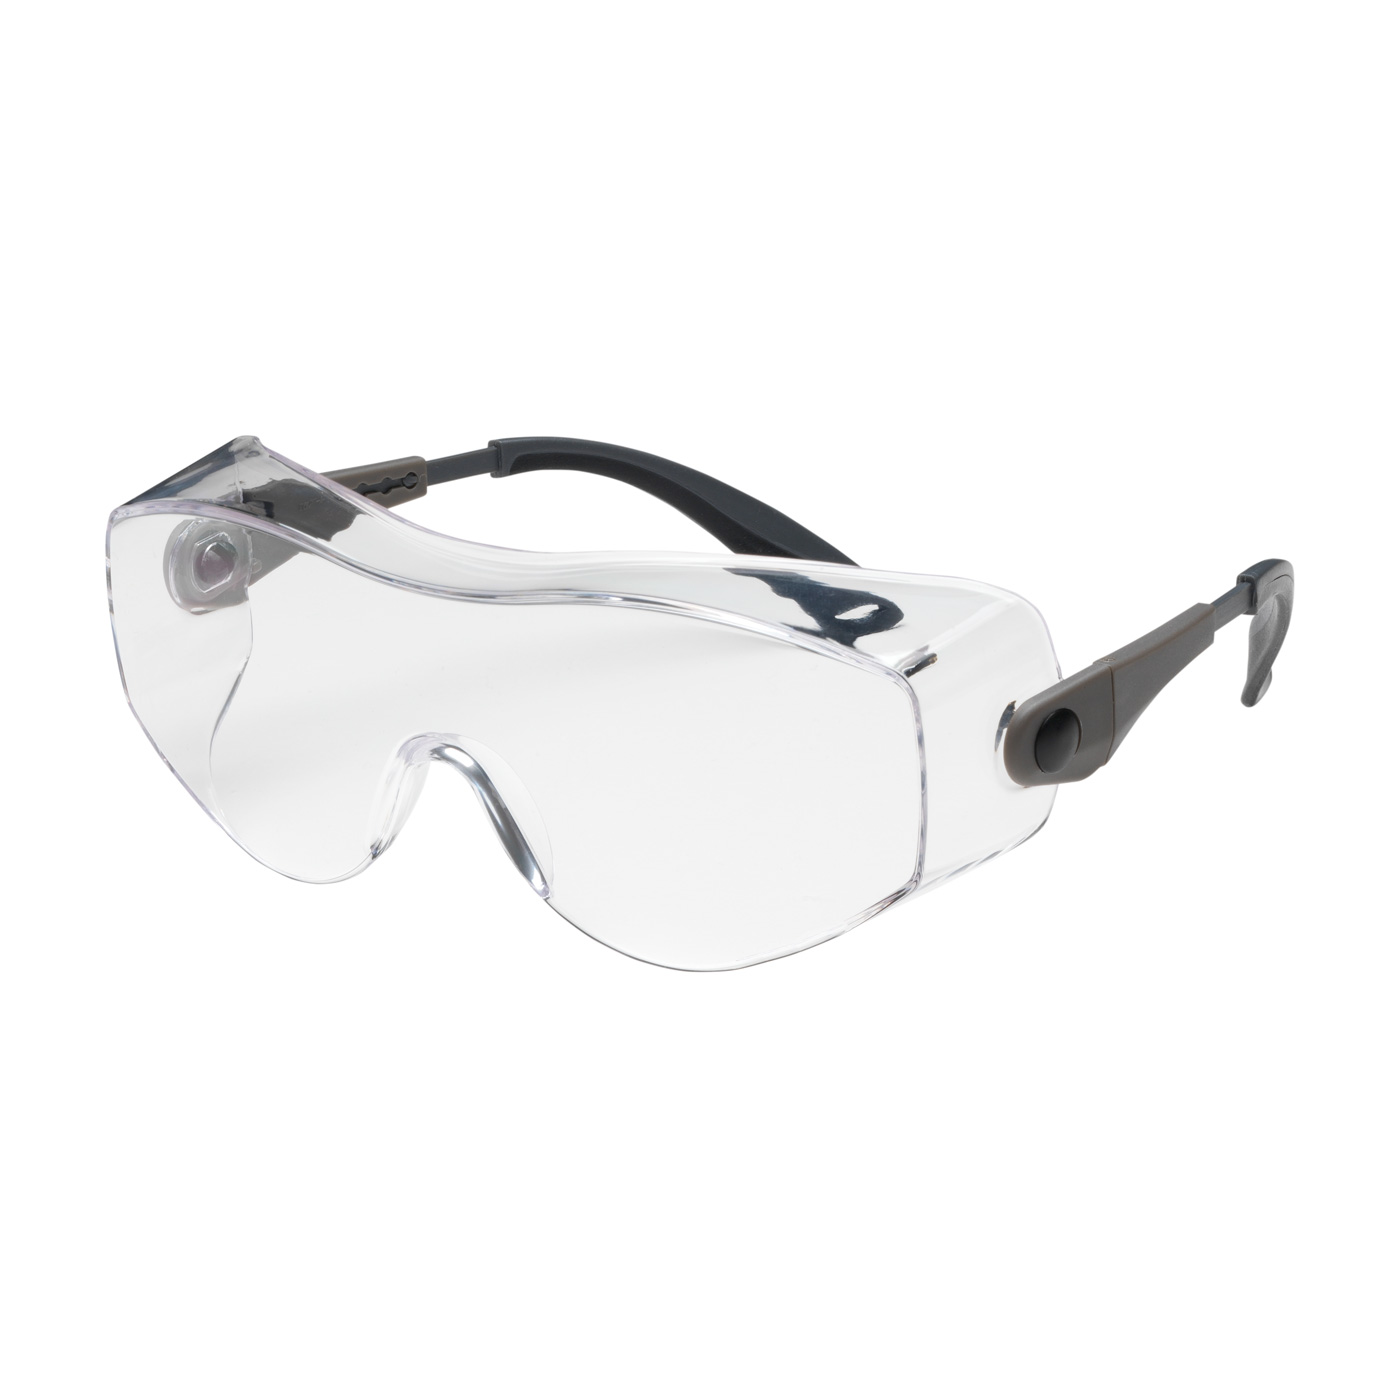 #250-98-0000 PIP OverSite™ OTG Rimless Safety Glasses with Black / Gray Temple, Clear Lens and Anti-Scratch Coating